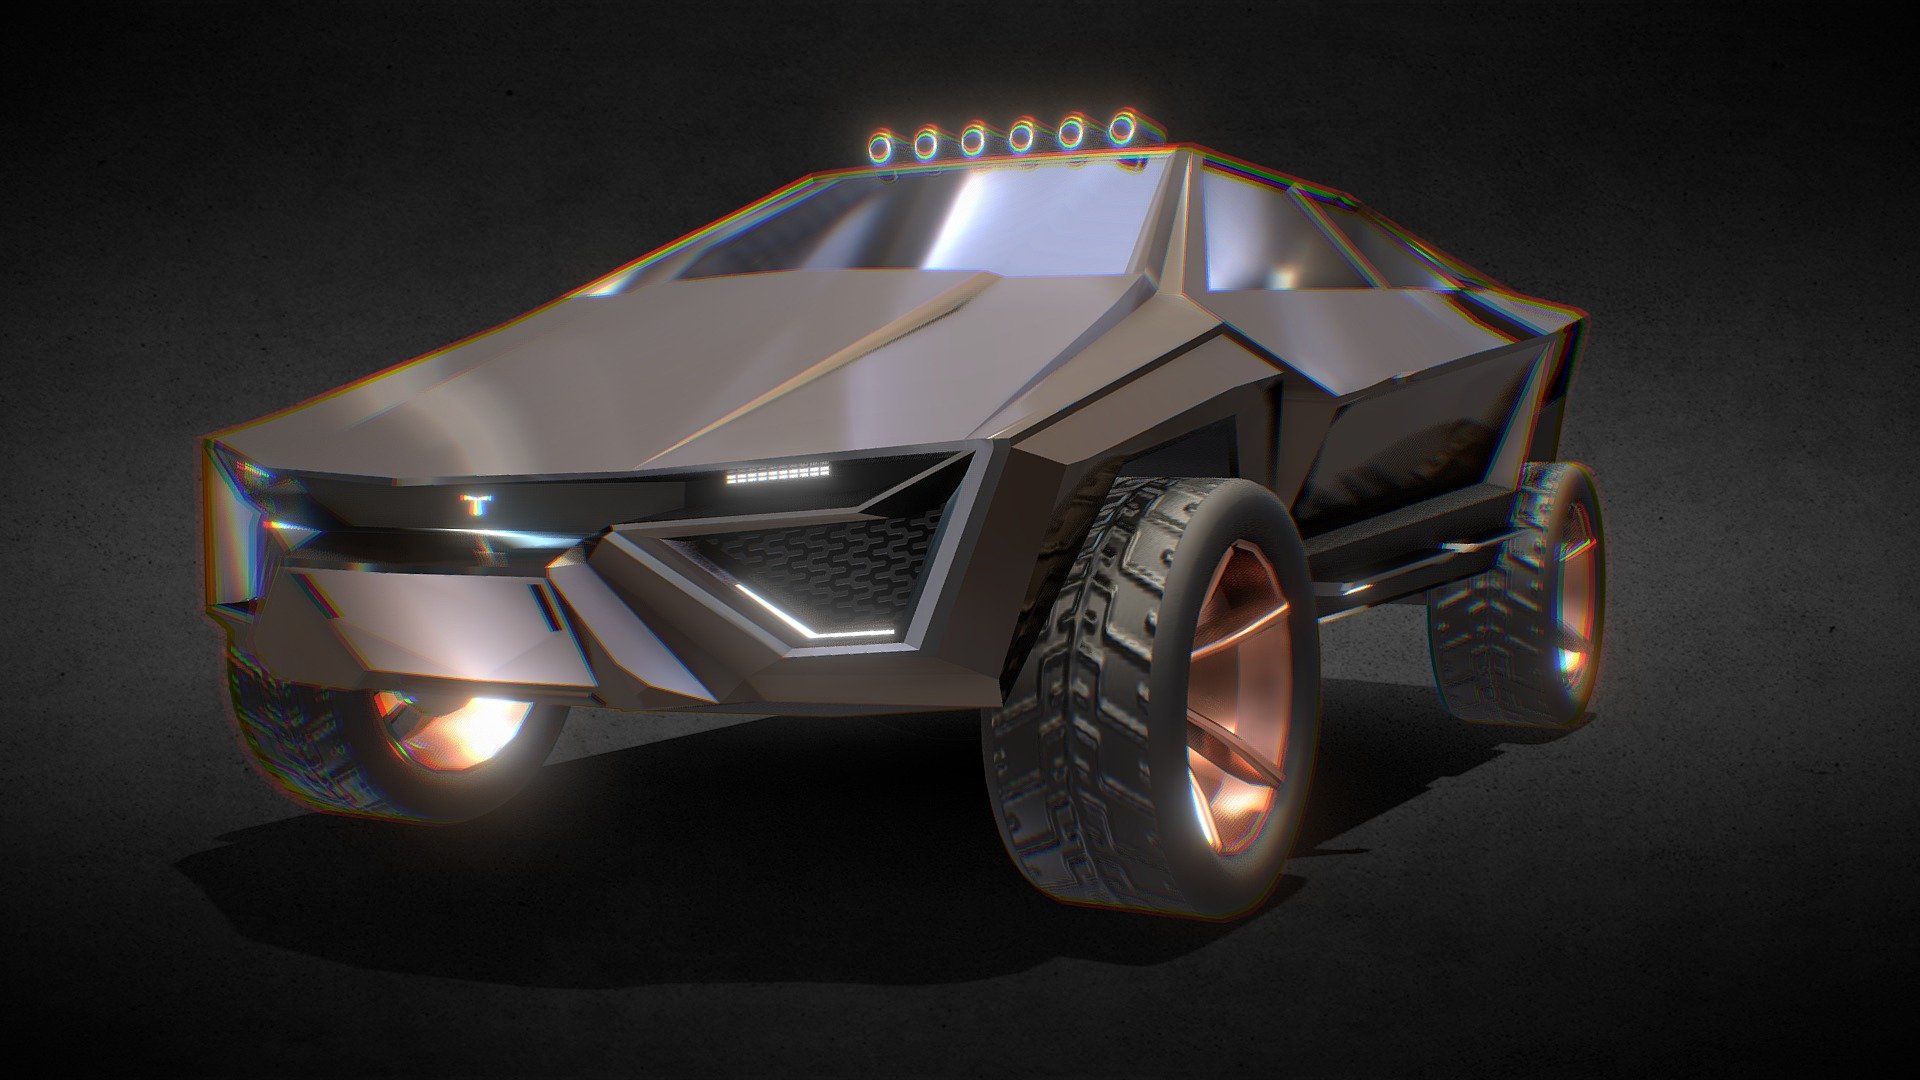 For my almost 500 fans i give you free model of concept car i called Wyvern. 

ENJOY!



Patreon channel with monthly free models - Wyvern concept car - FREE - Download Free 3D model by NETRUNNER_pl 3d model